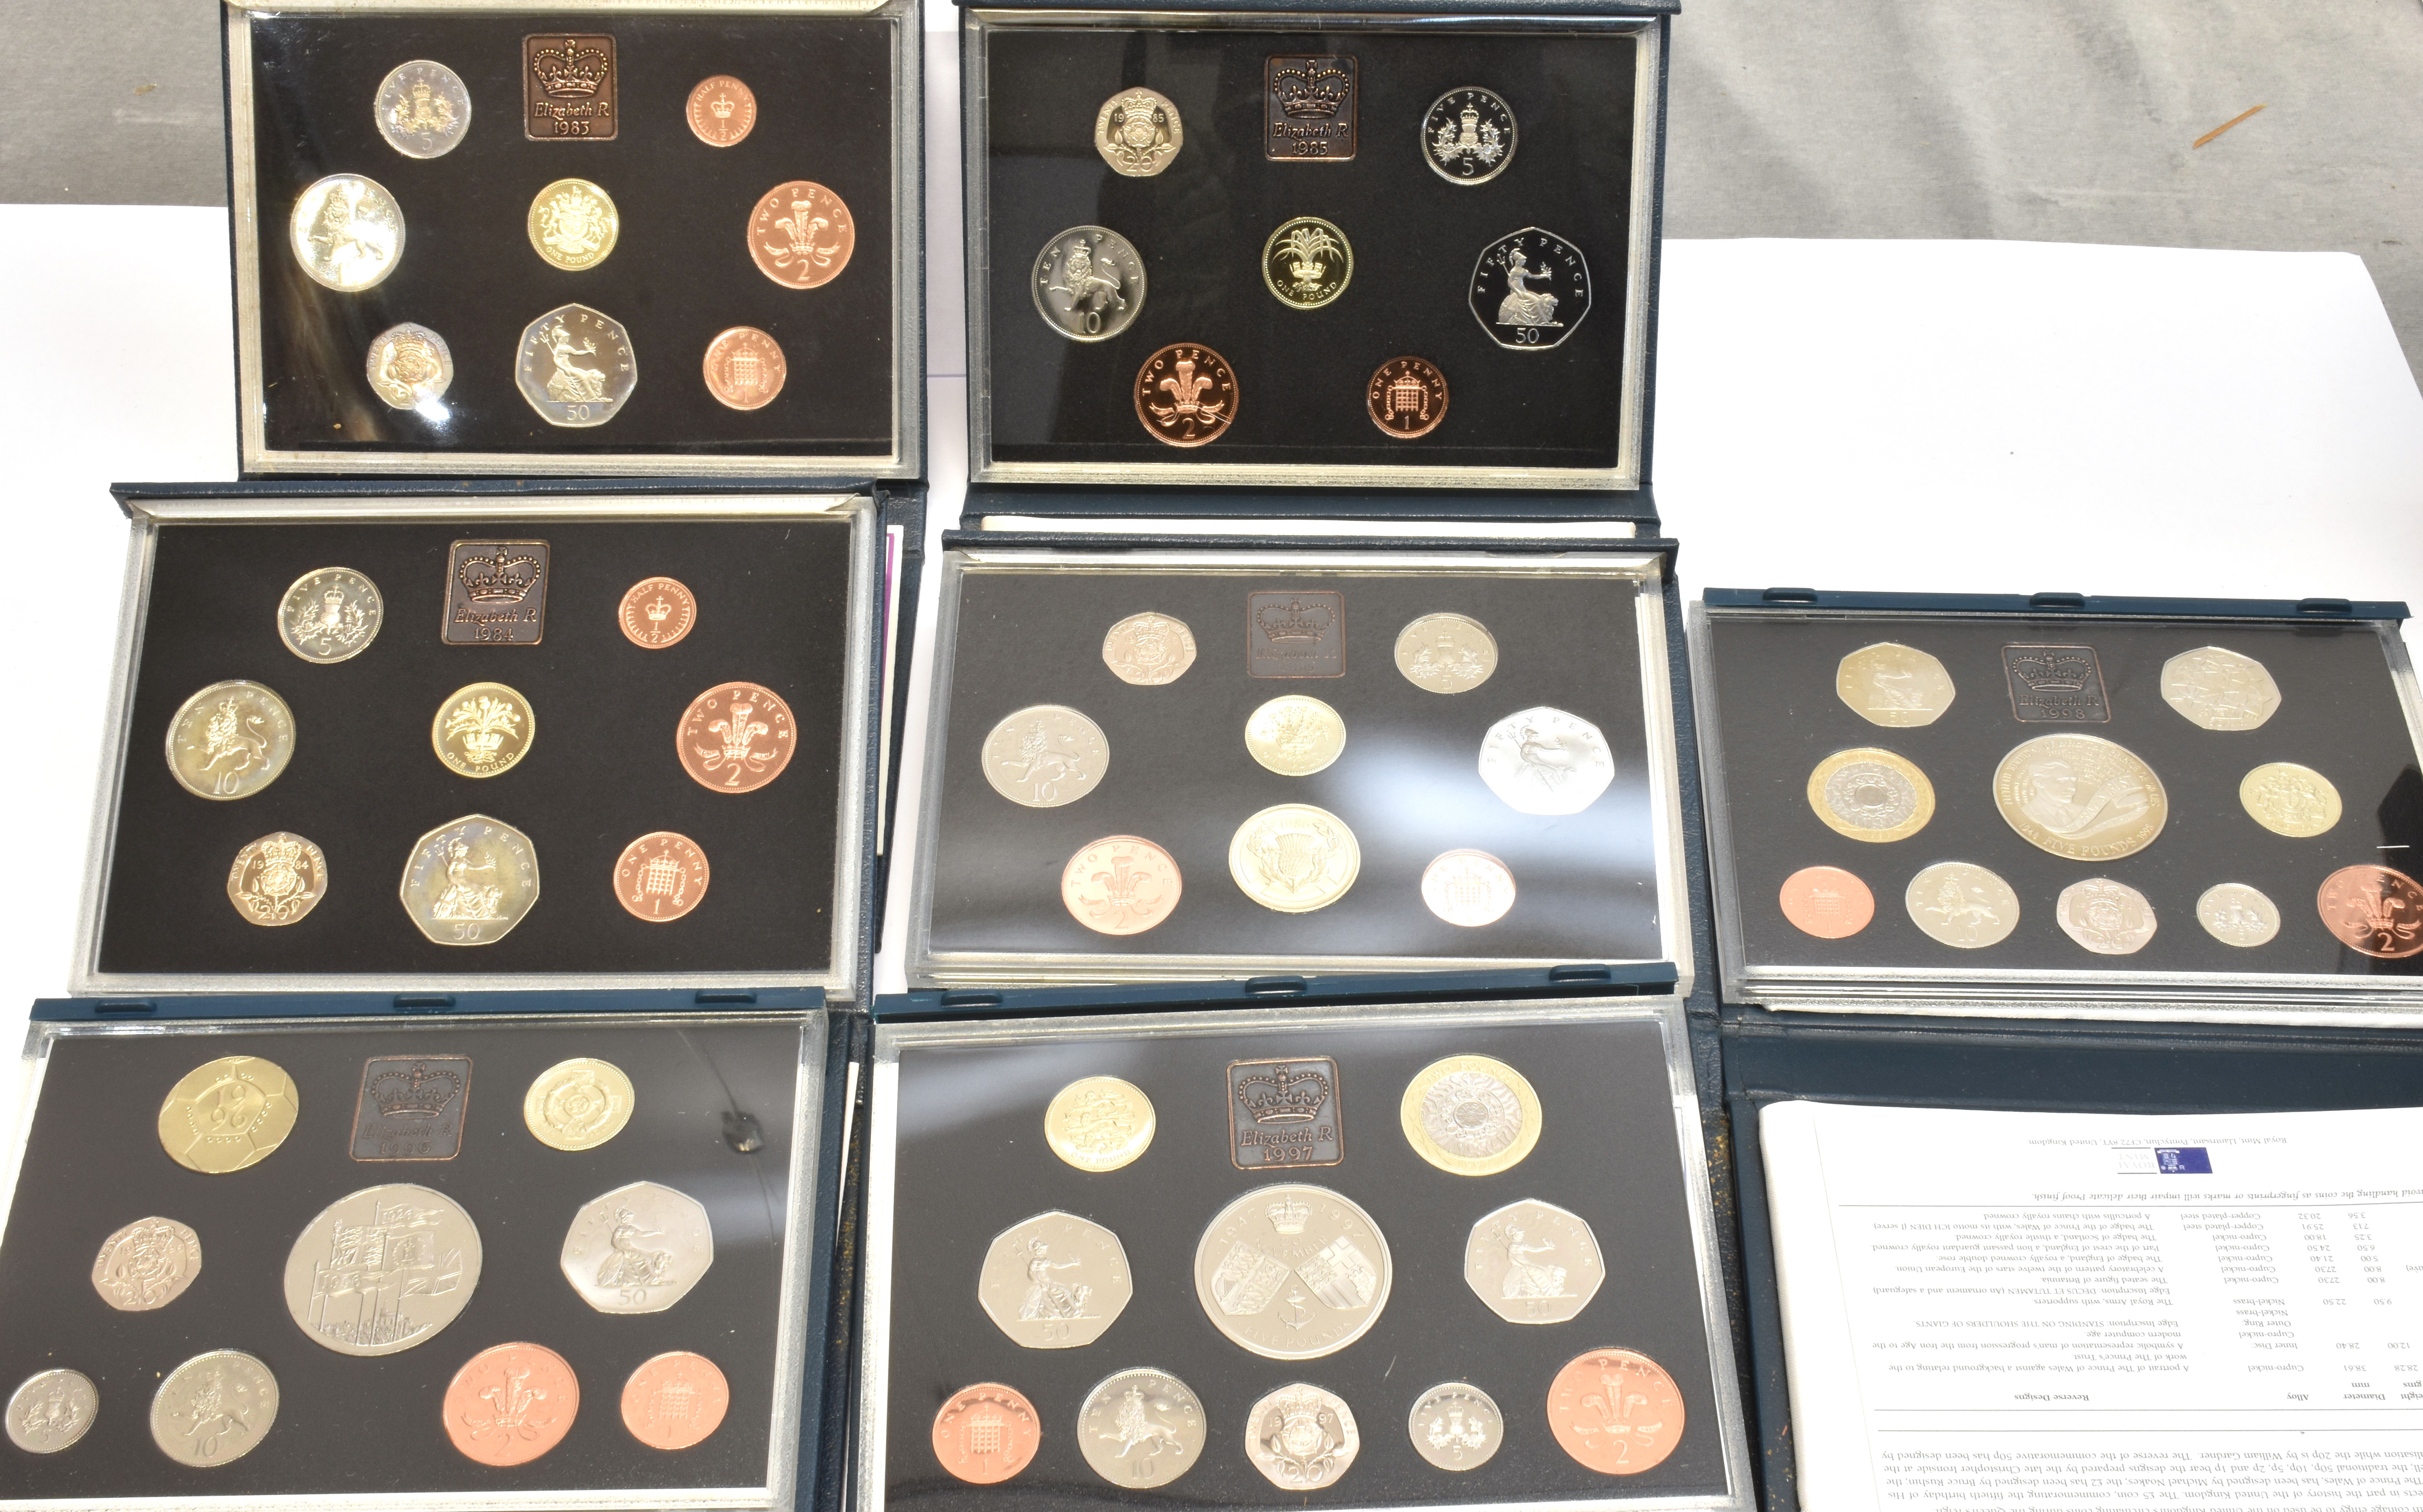 GREAT BRITAIN - ELIZABETH II, COIN SETS, 1970-1978, 1980-1991, 1994-2000 each in a hard plastic - Image 3 of 4